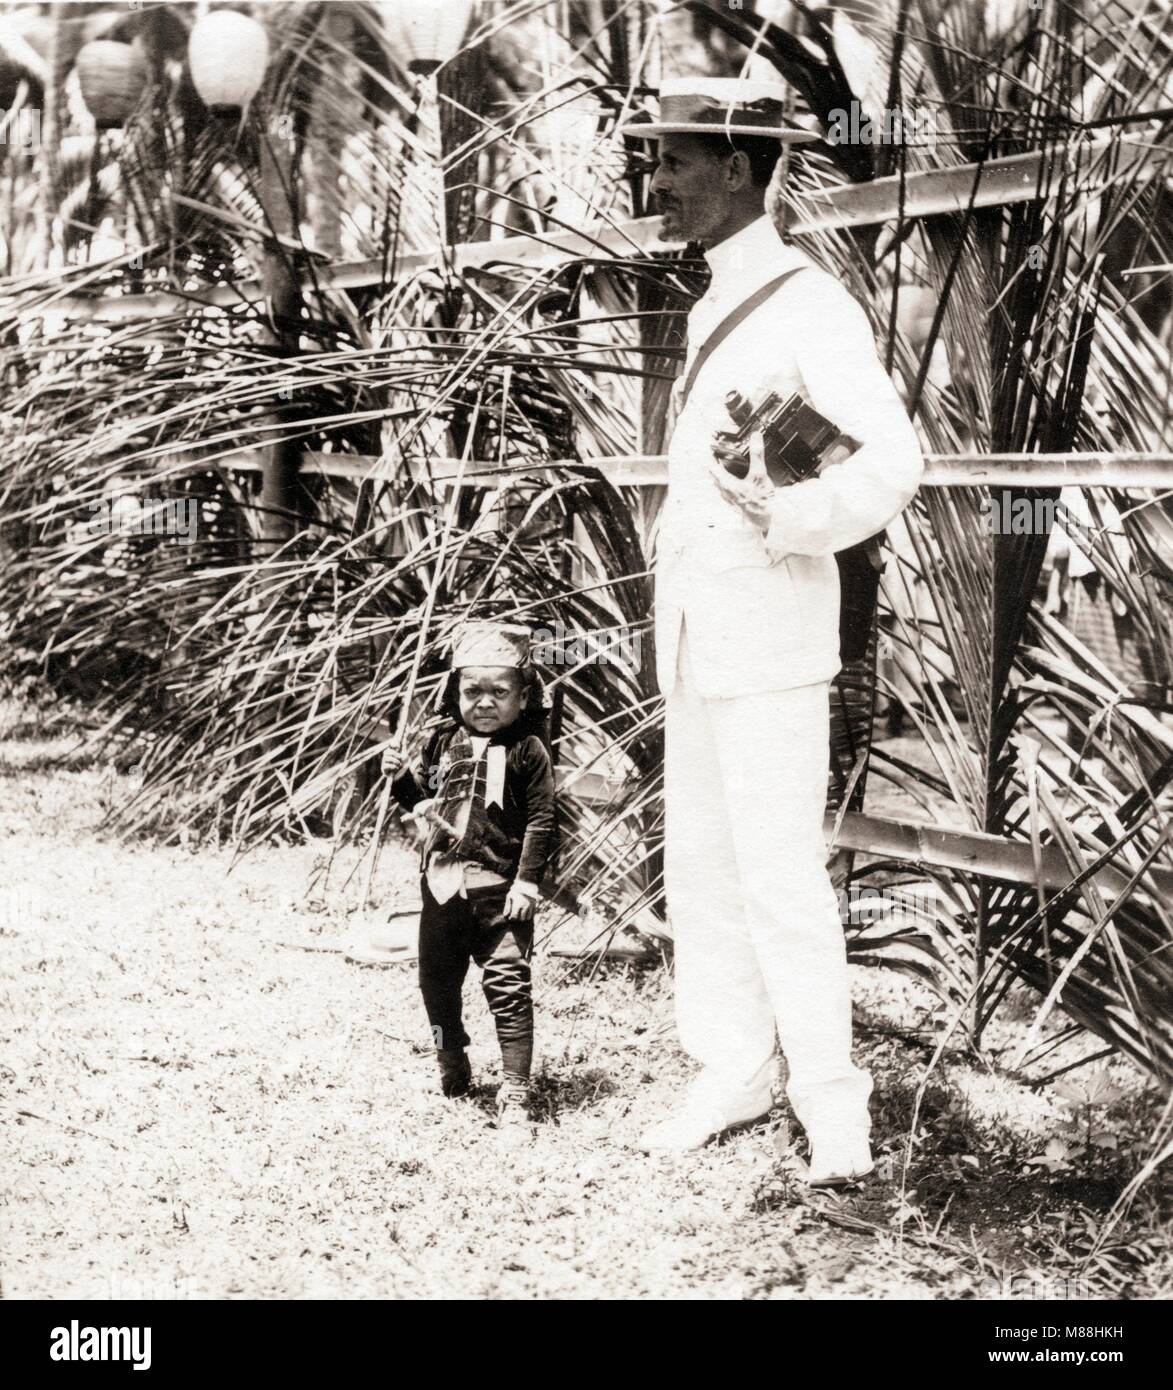 Burton Holmes avec Moro Chieftain Datto Diki Diki, Philippines, 1913 Banque D'Images